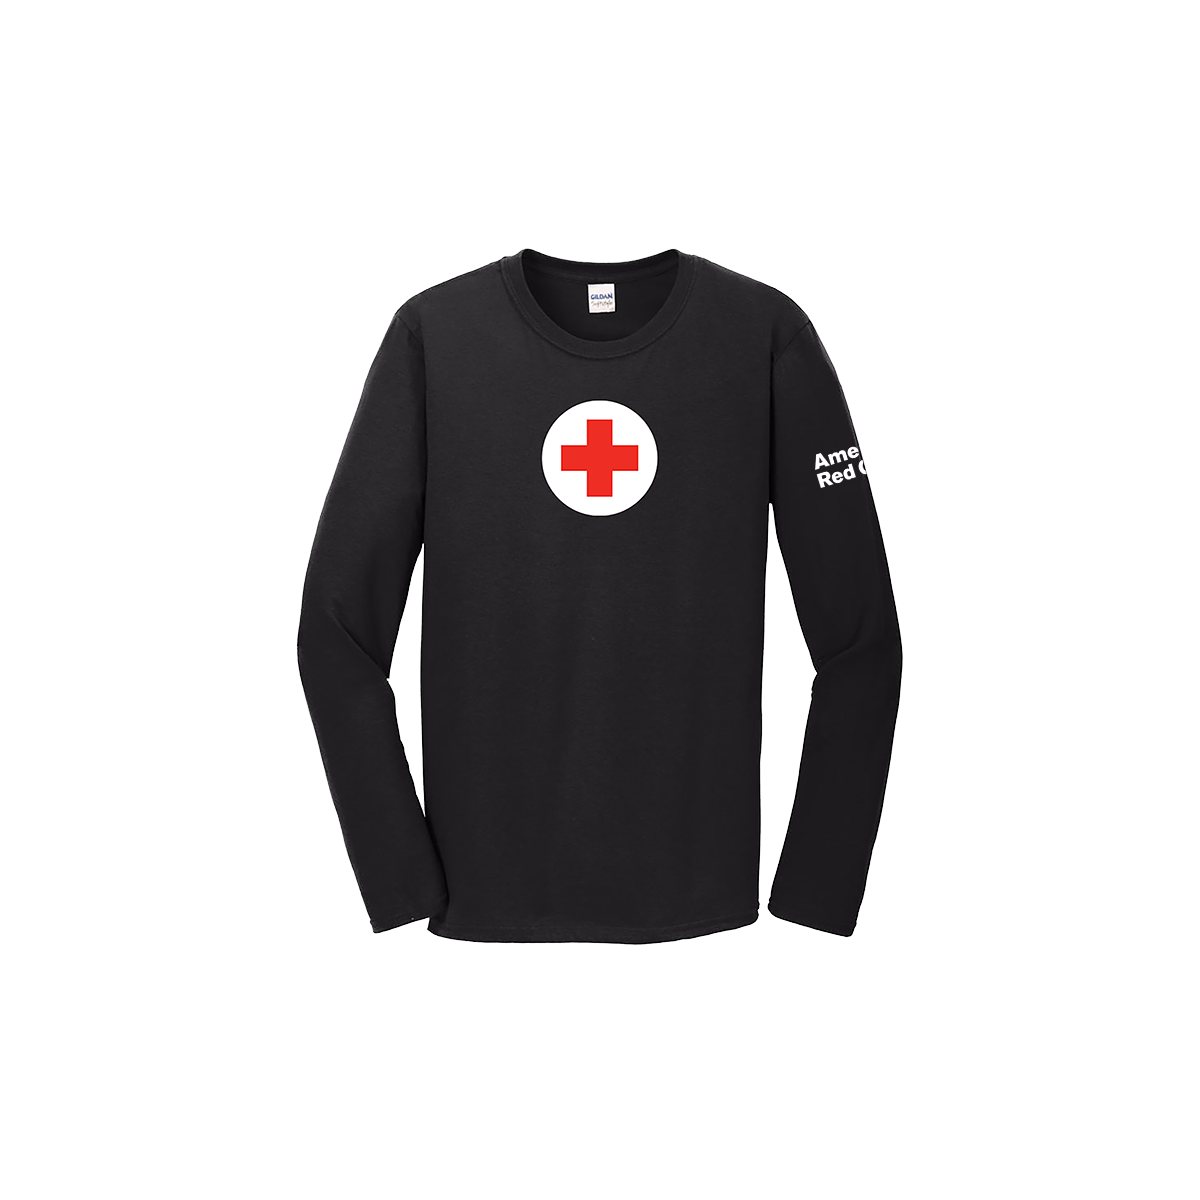 T and Red Cross Logo - Unisex Cotton Long Sleeve T-Shirt with Logo | Red Cross Store